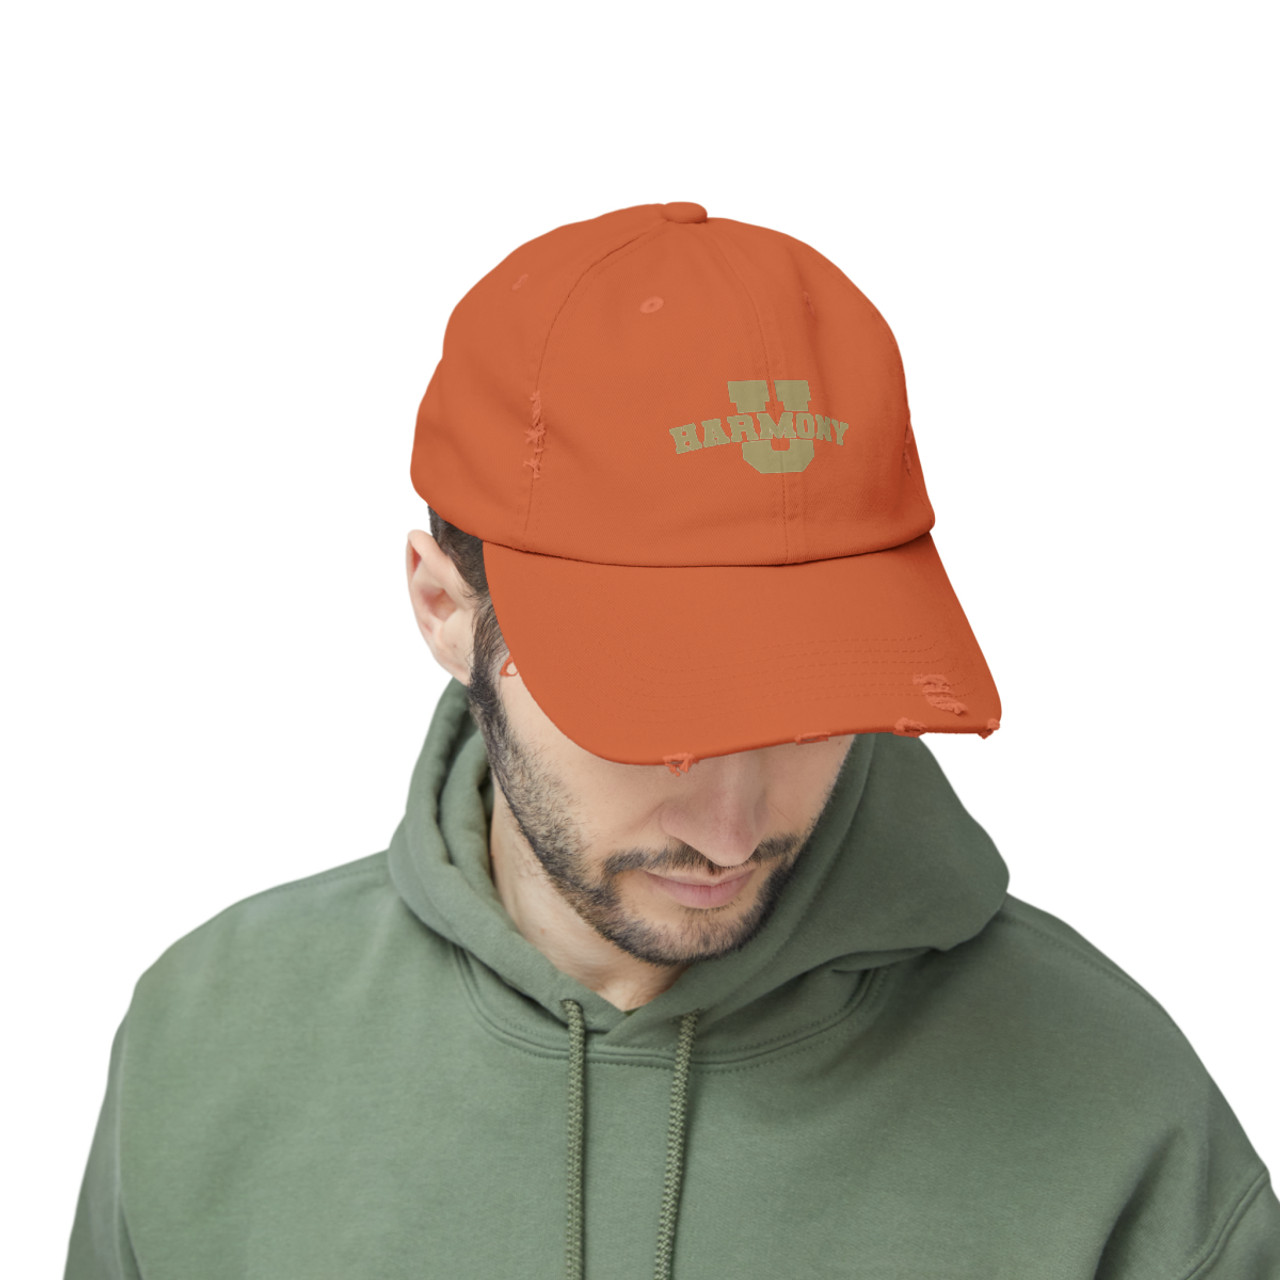 Harmony U Distressed Cap - Multiple Colors Available